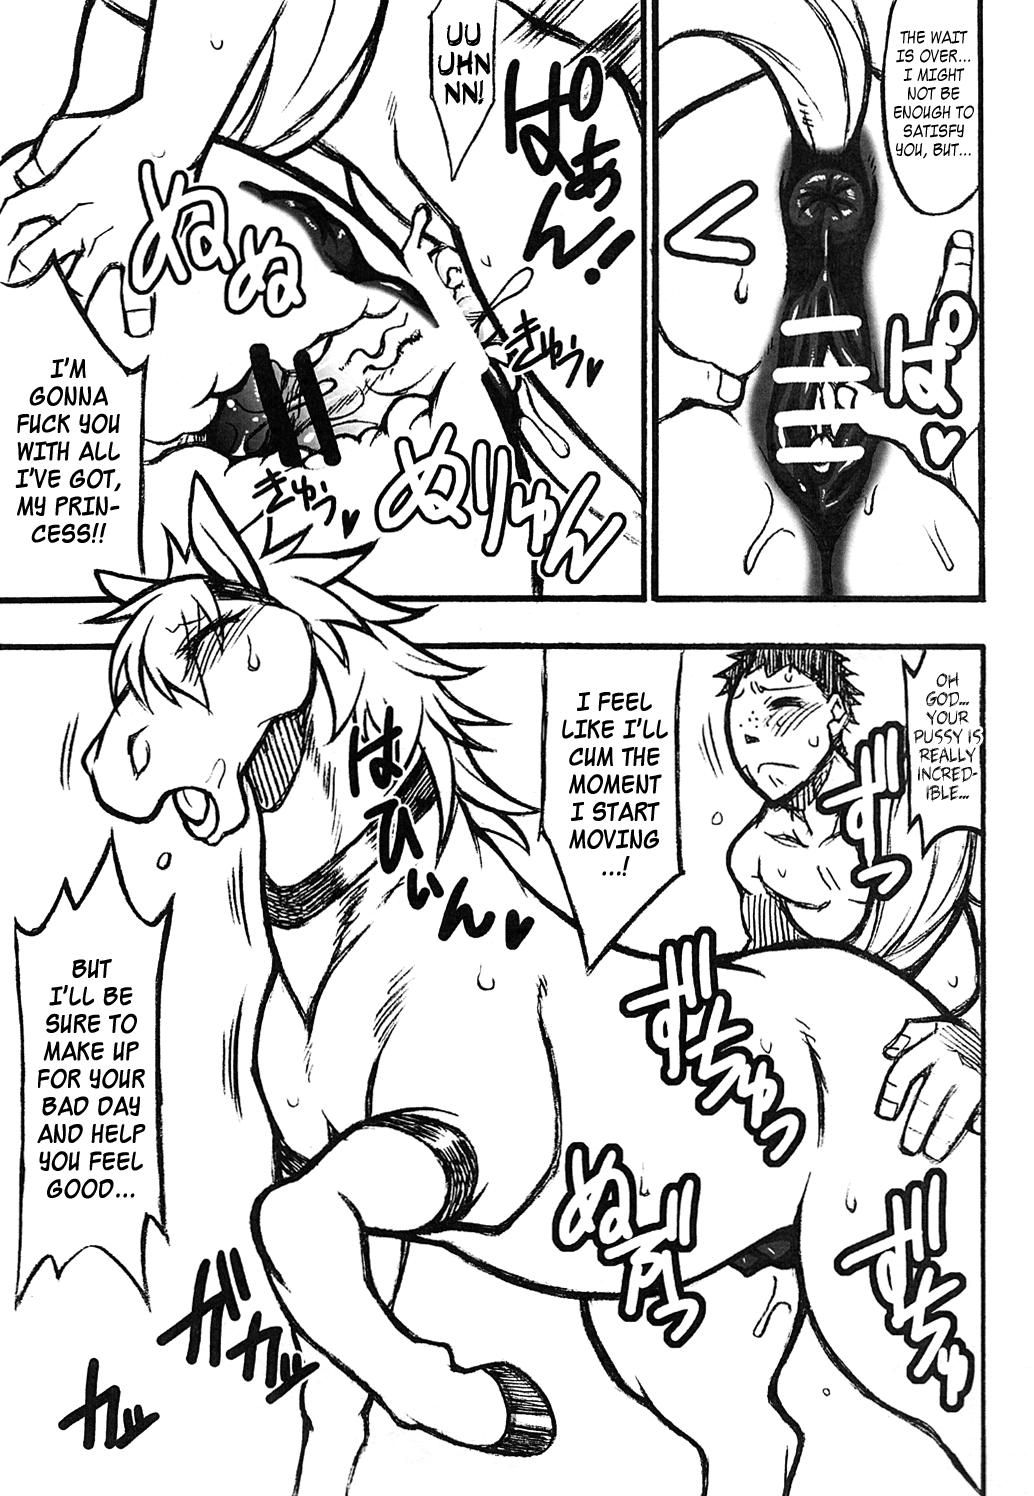 Girl Mare Holic Kemolover EX Ch.1-3 Asshole - Page 9